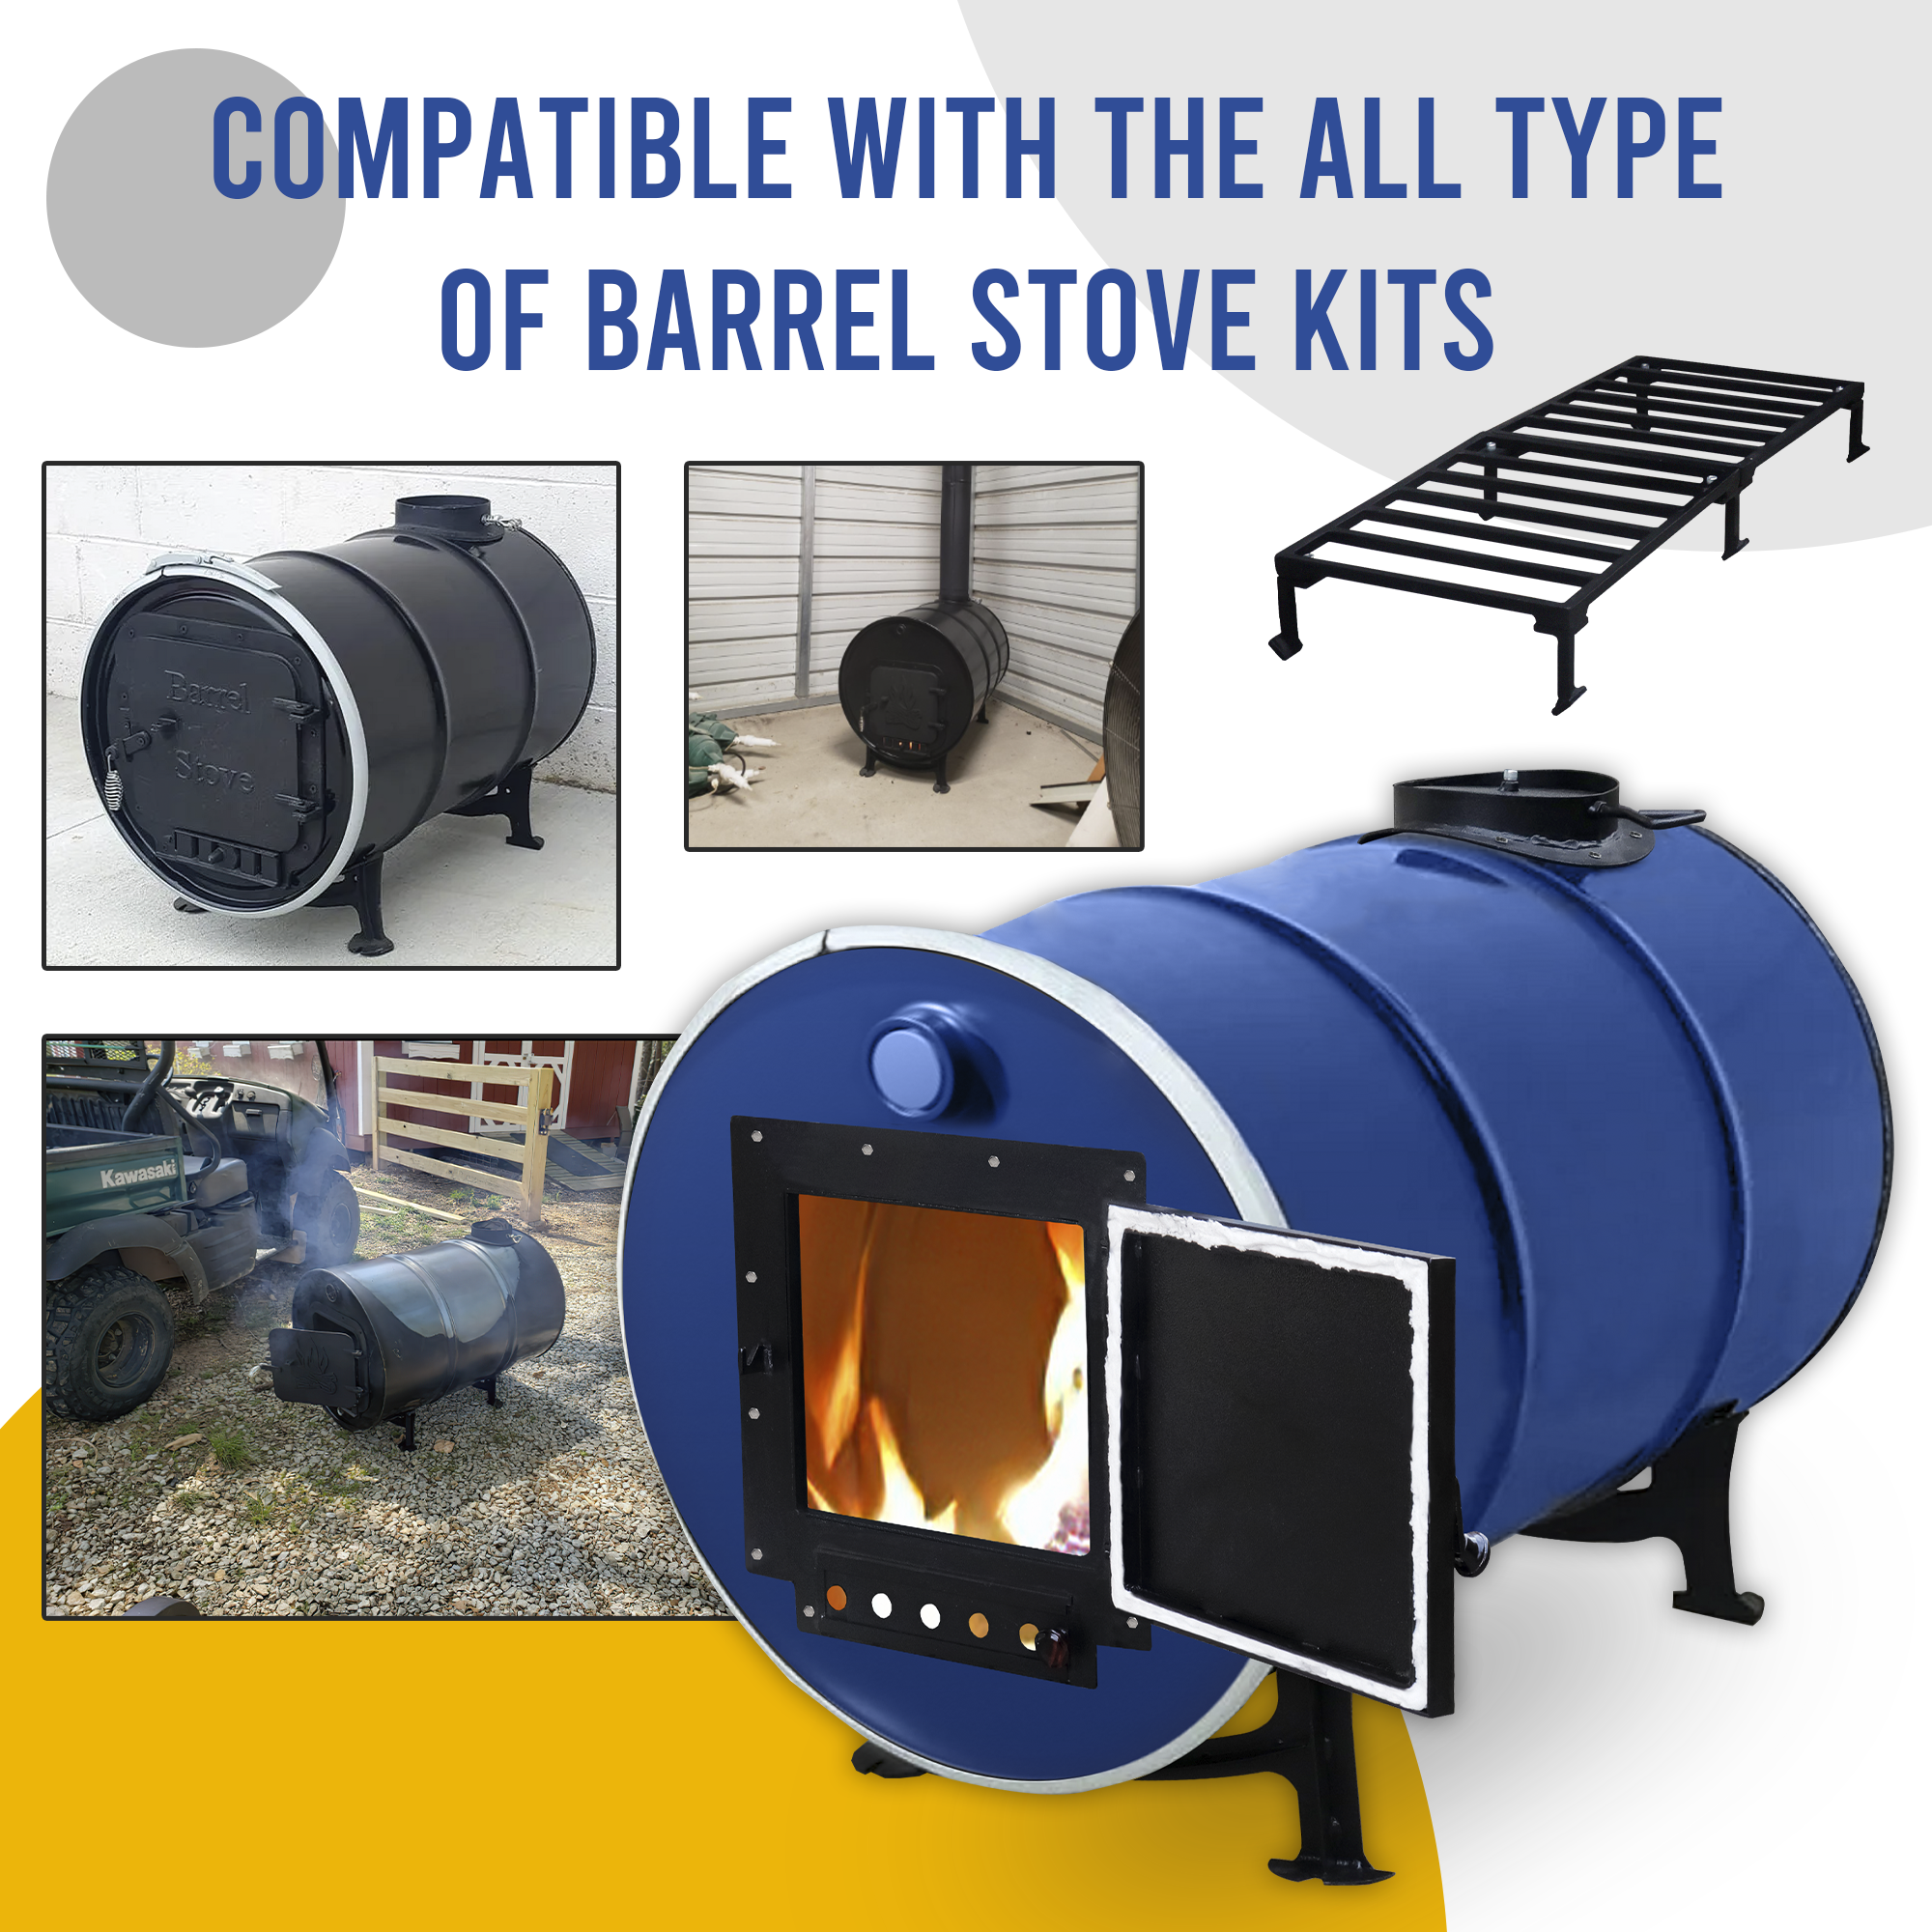 Sonret burn barrel grate Perfect for 30-55 Gallon barrel metal barrel -  grate for wood stove camping equipment barrel stove kits - fire barrel kit  for emergency heating & Cooking and Survival 